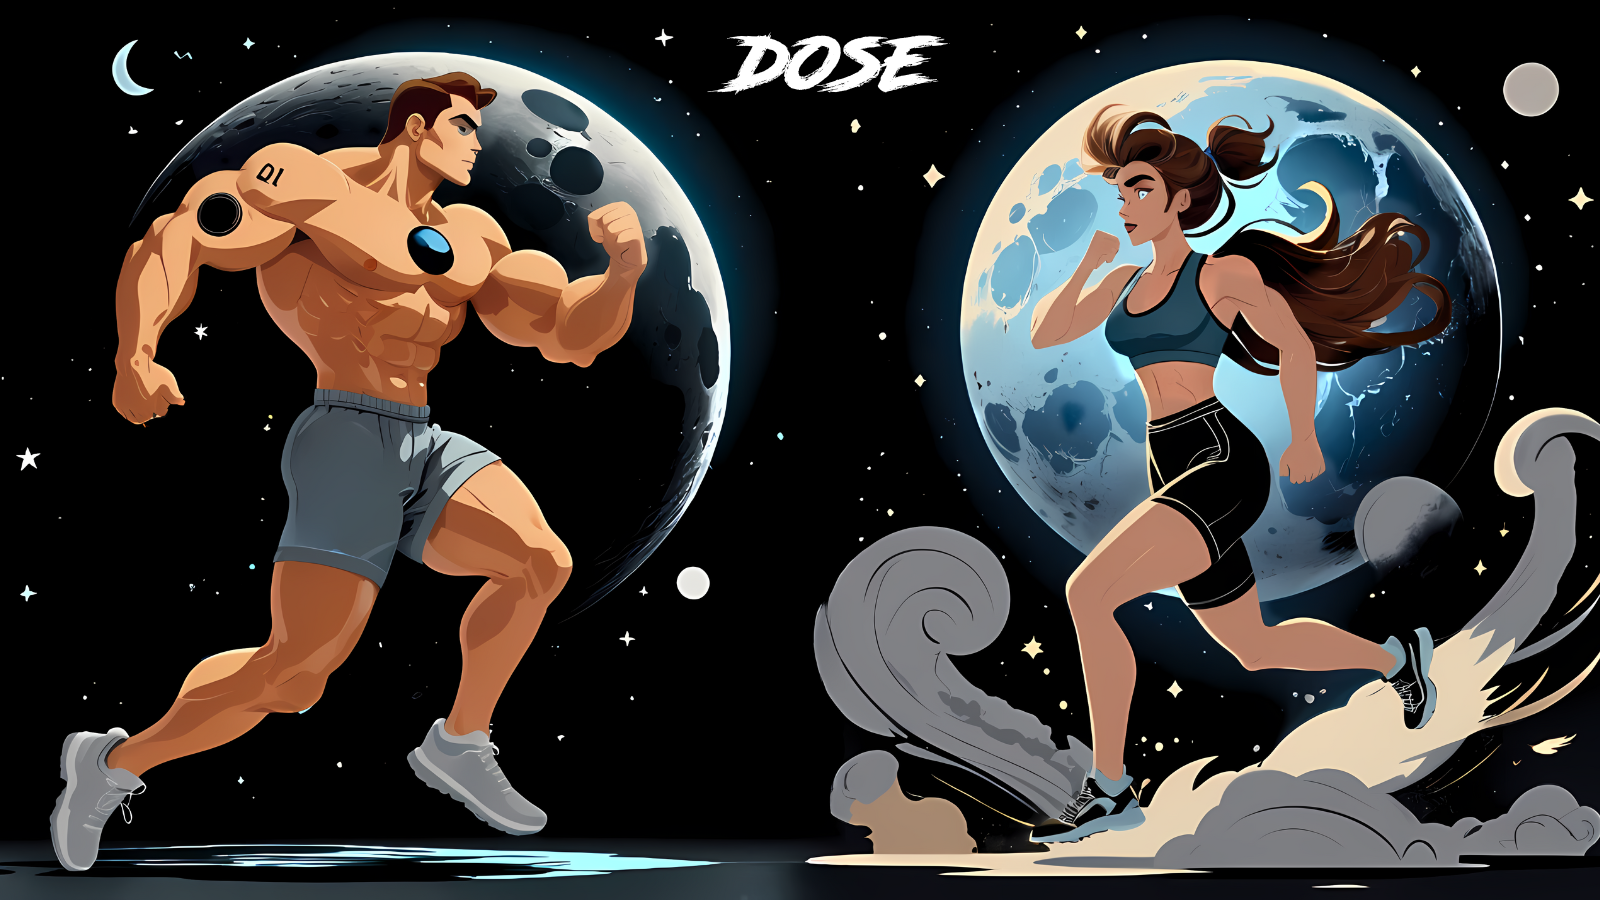 Dose Fuel Supplement - Empowering Men and Women for Peak Performance, Featuring Strong Athletic Figures Running Against a Lunar Background